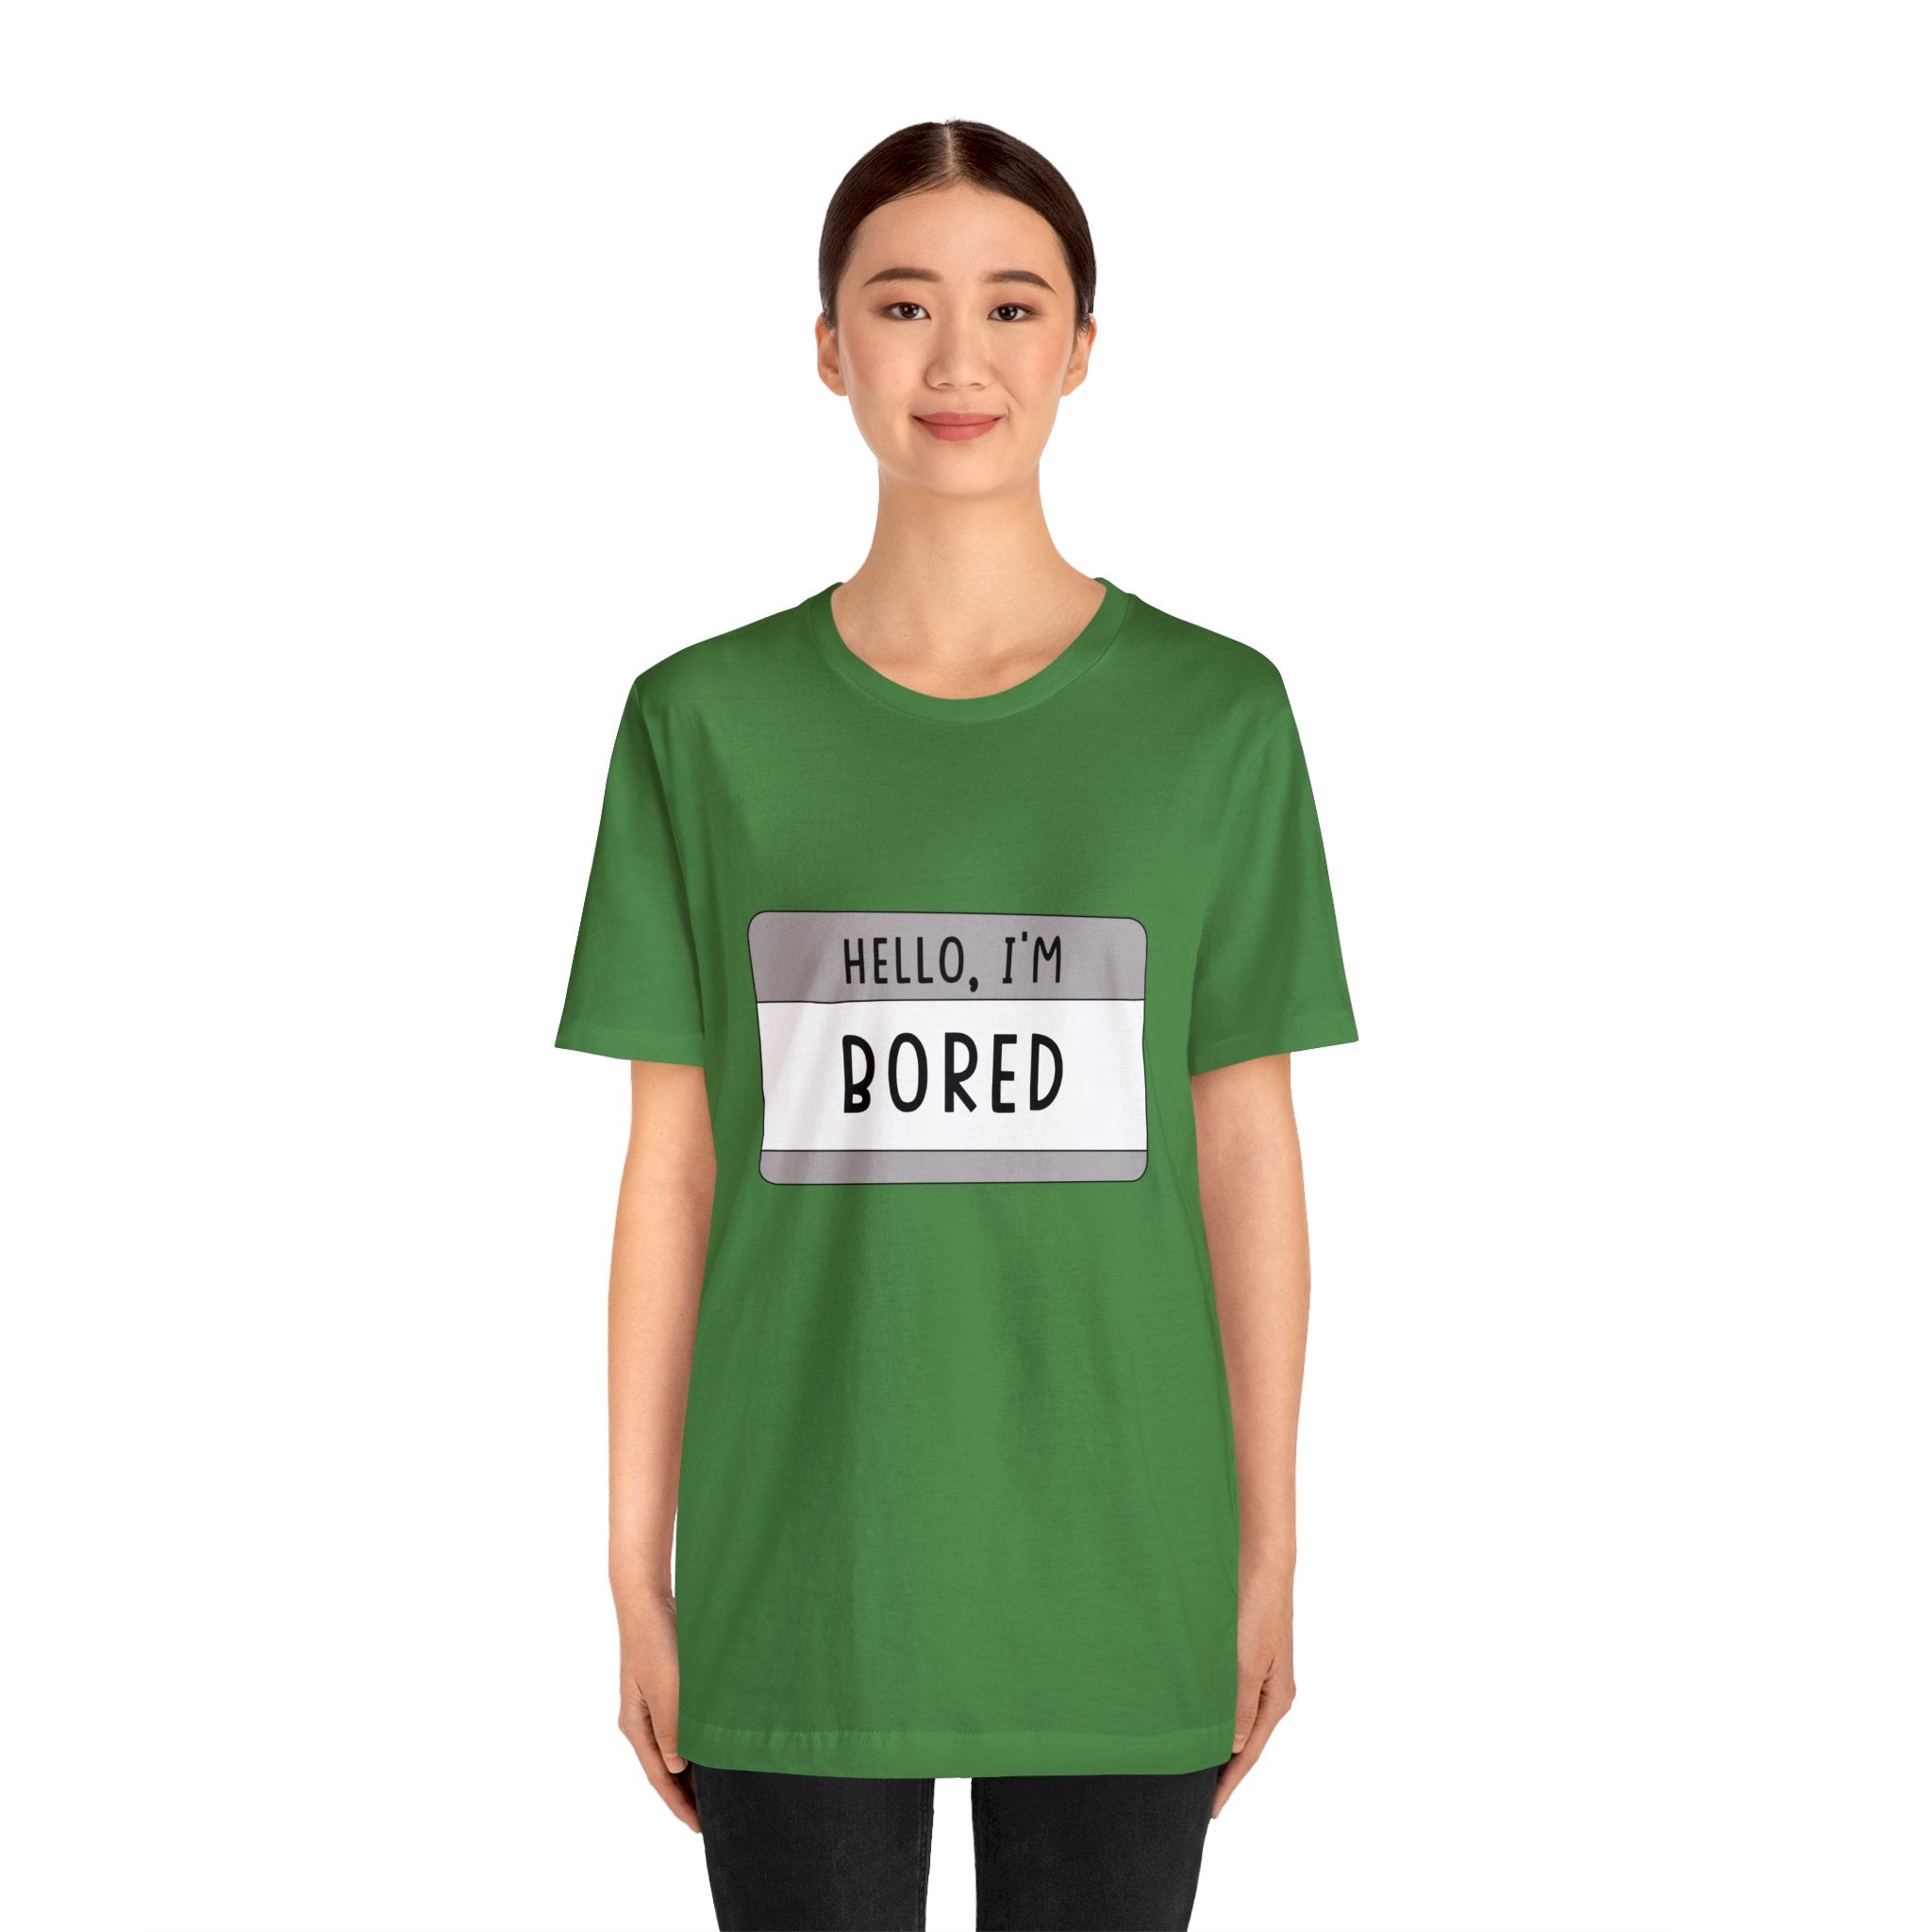 A woman in a green tee-shirt that says "Hello, I'm Board" adds character to her outfit.